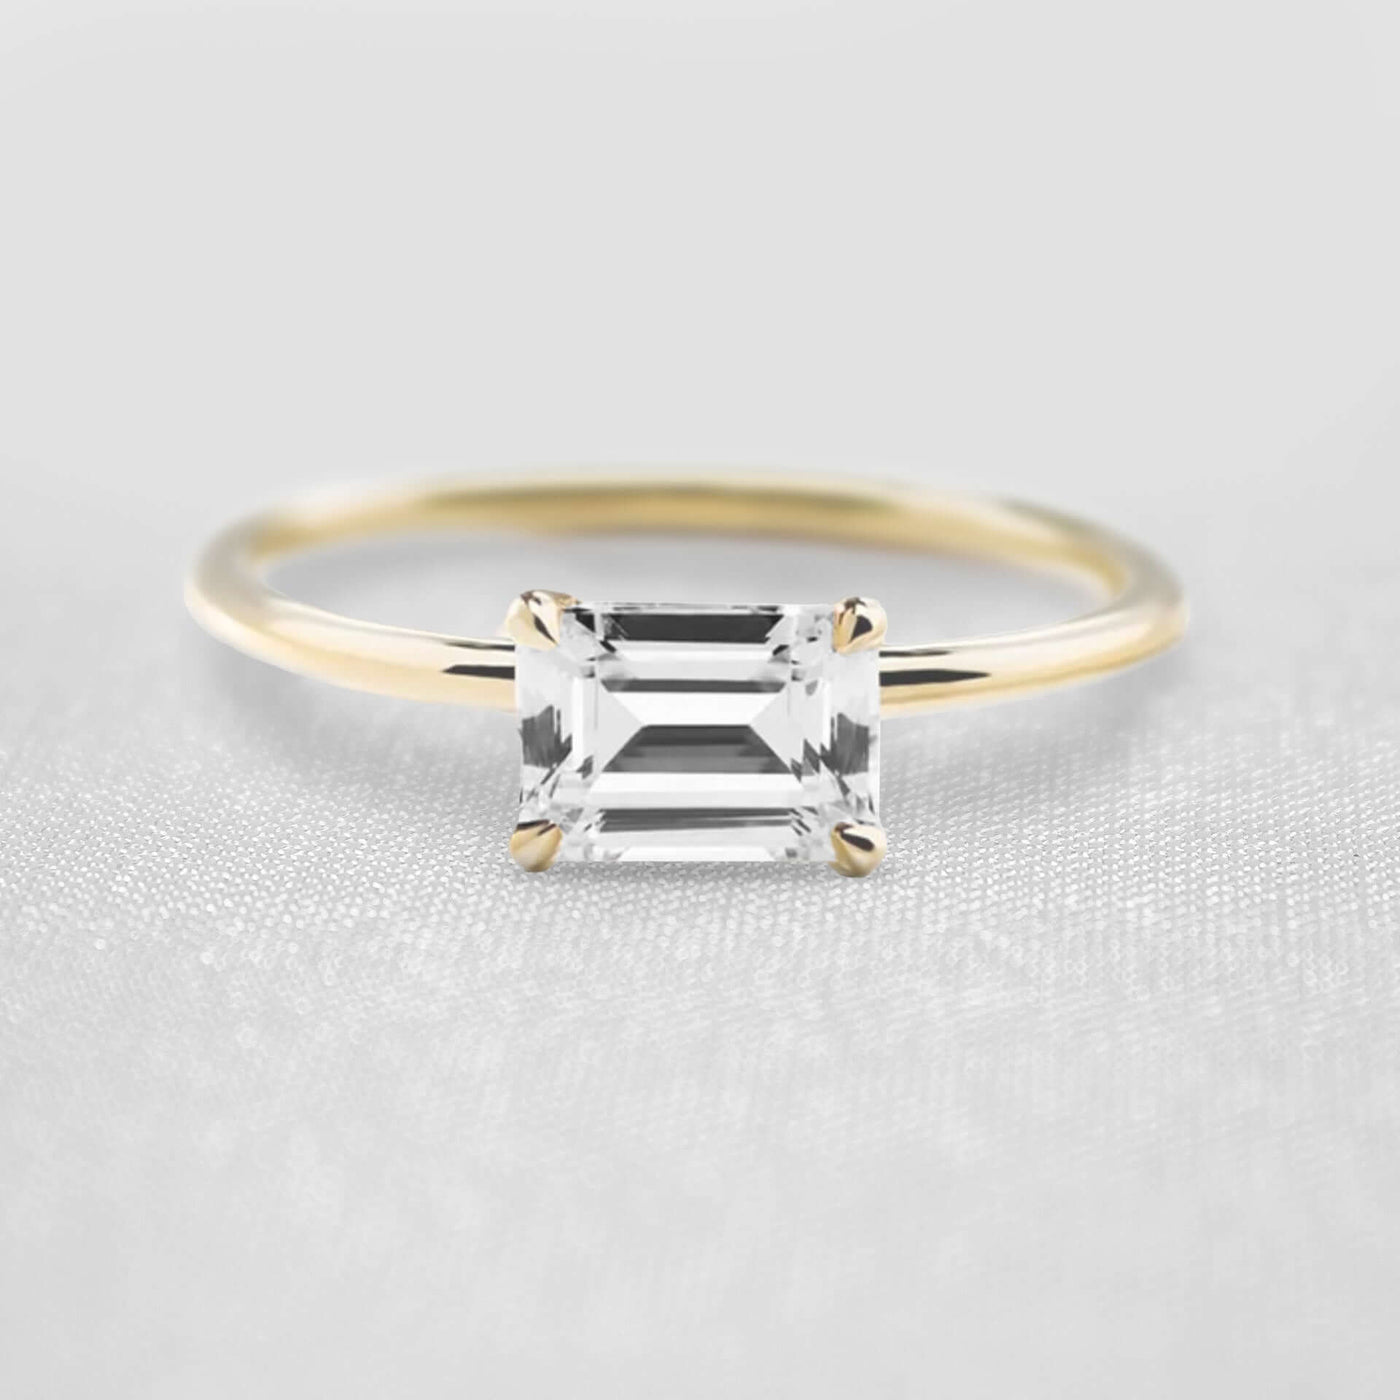 Shown in 1.0 Carat * The Mia East West Emerald Cut Moissanite Solitaire Engagement Ring | Lisa Robin#shape_emerald